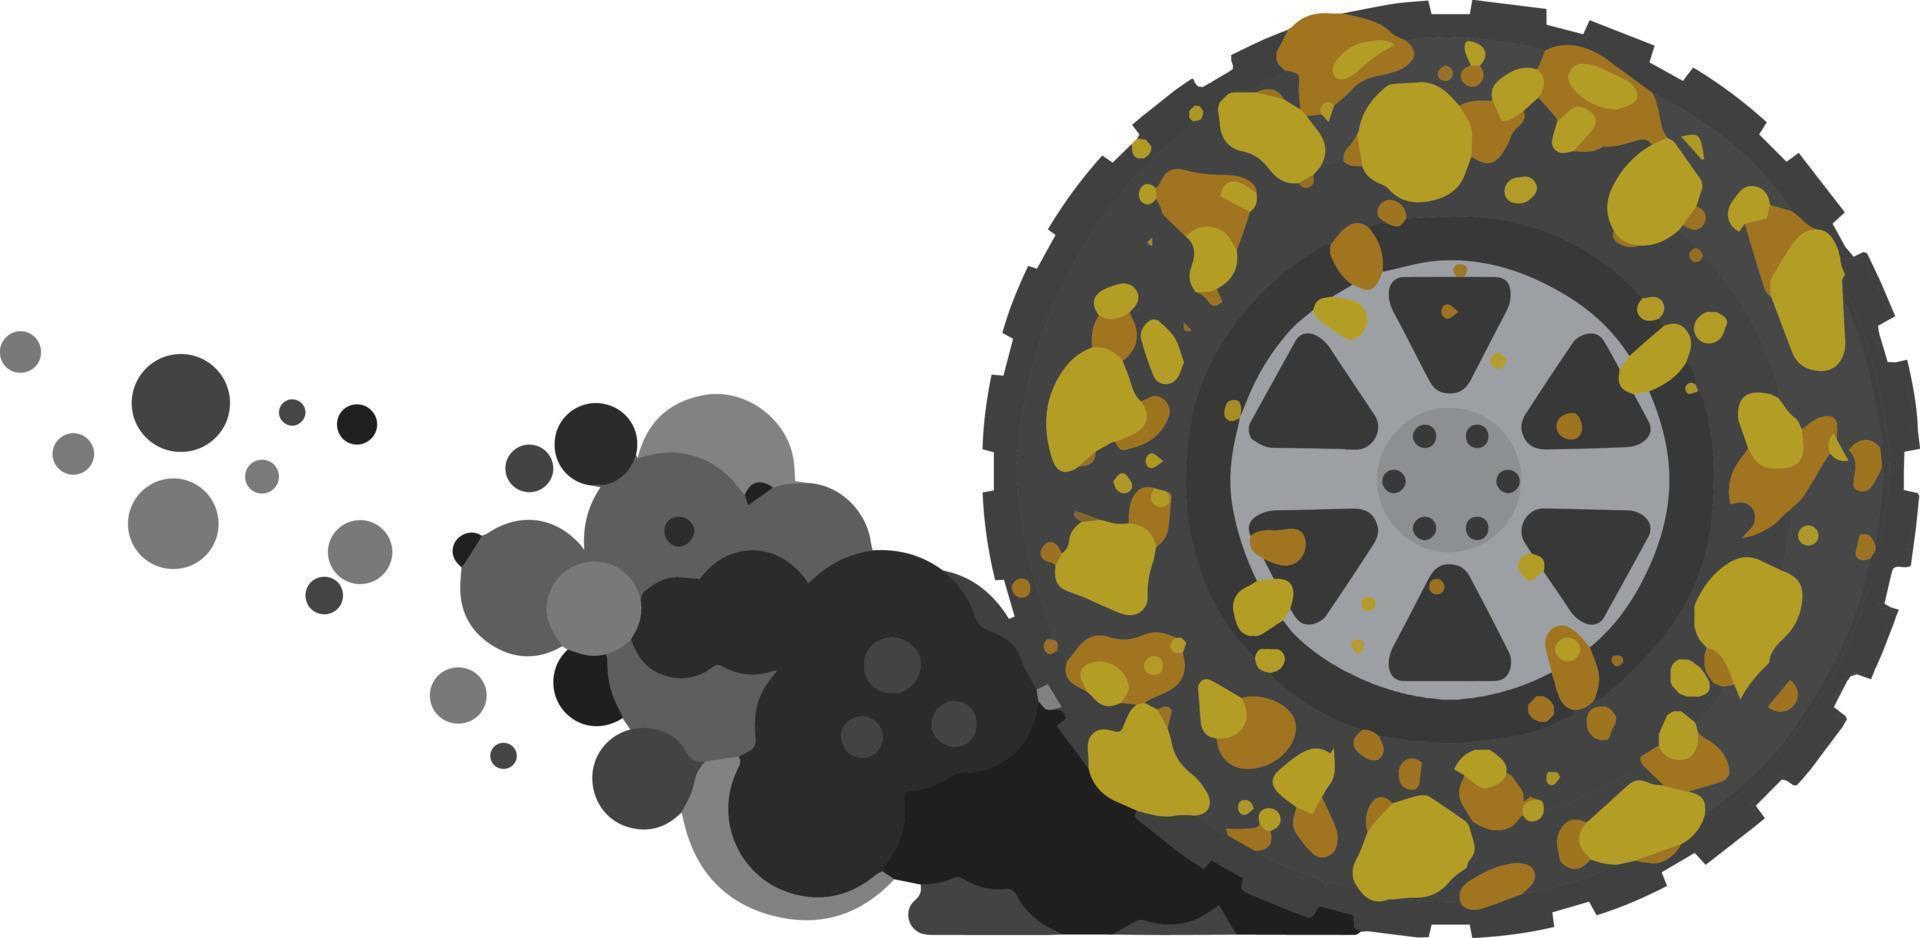 Dirty wheel of truck. Off-road driving. Ground on tire. Car wash symbol. Garbage and dirt. Cartoon flat illustration vector